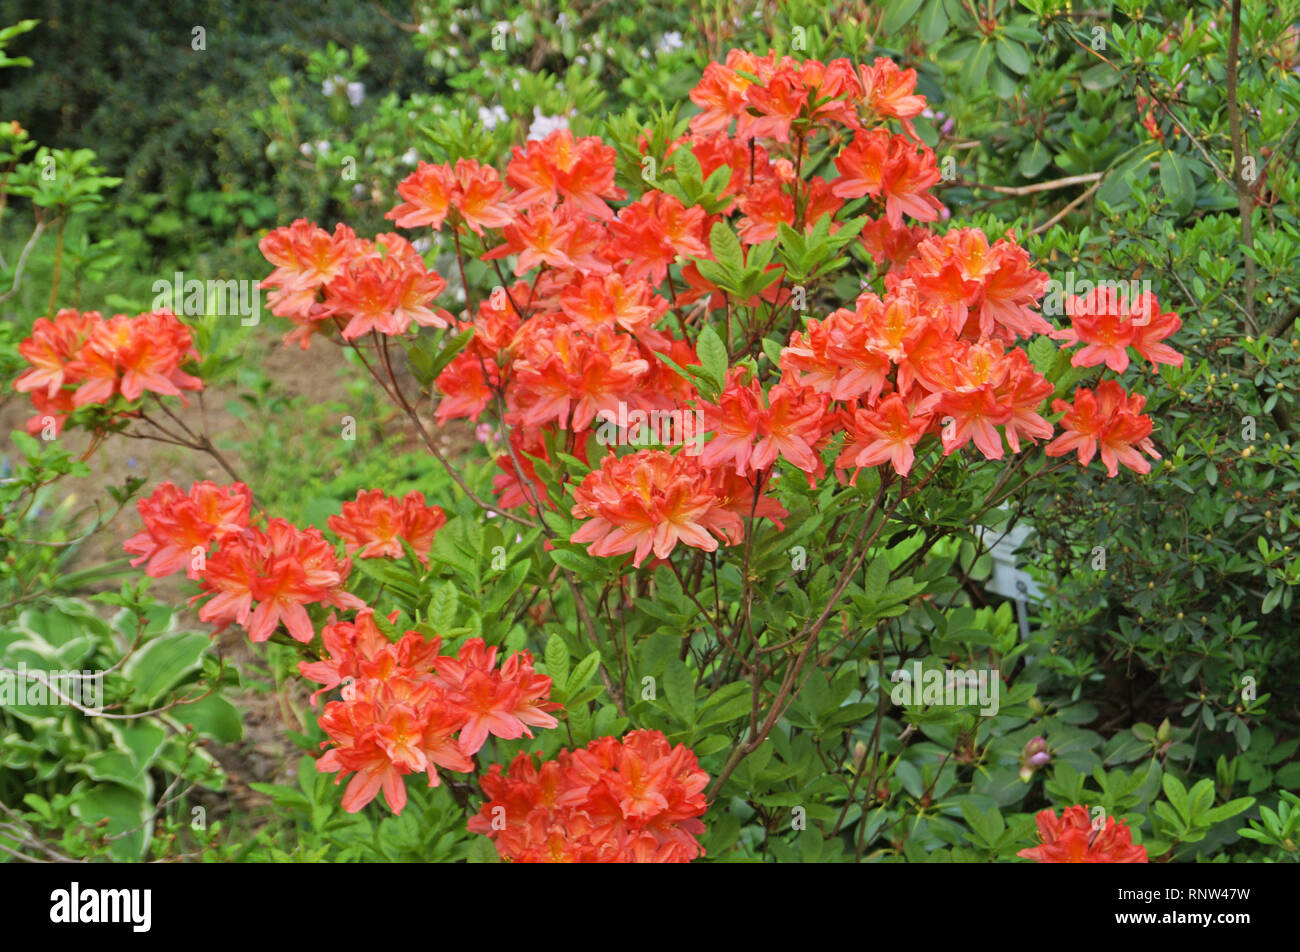 Rhododendron bush with delicate red flowers and green leaves Stock Photo